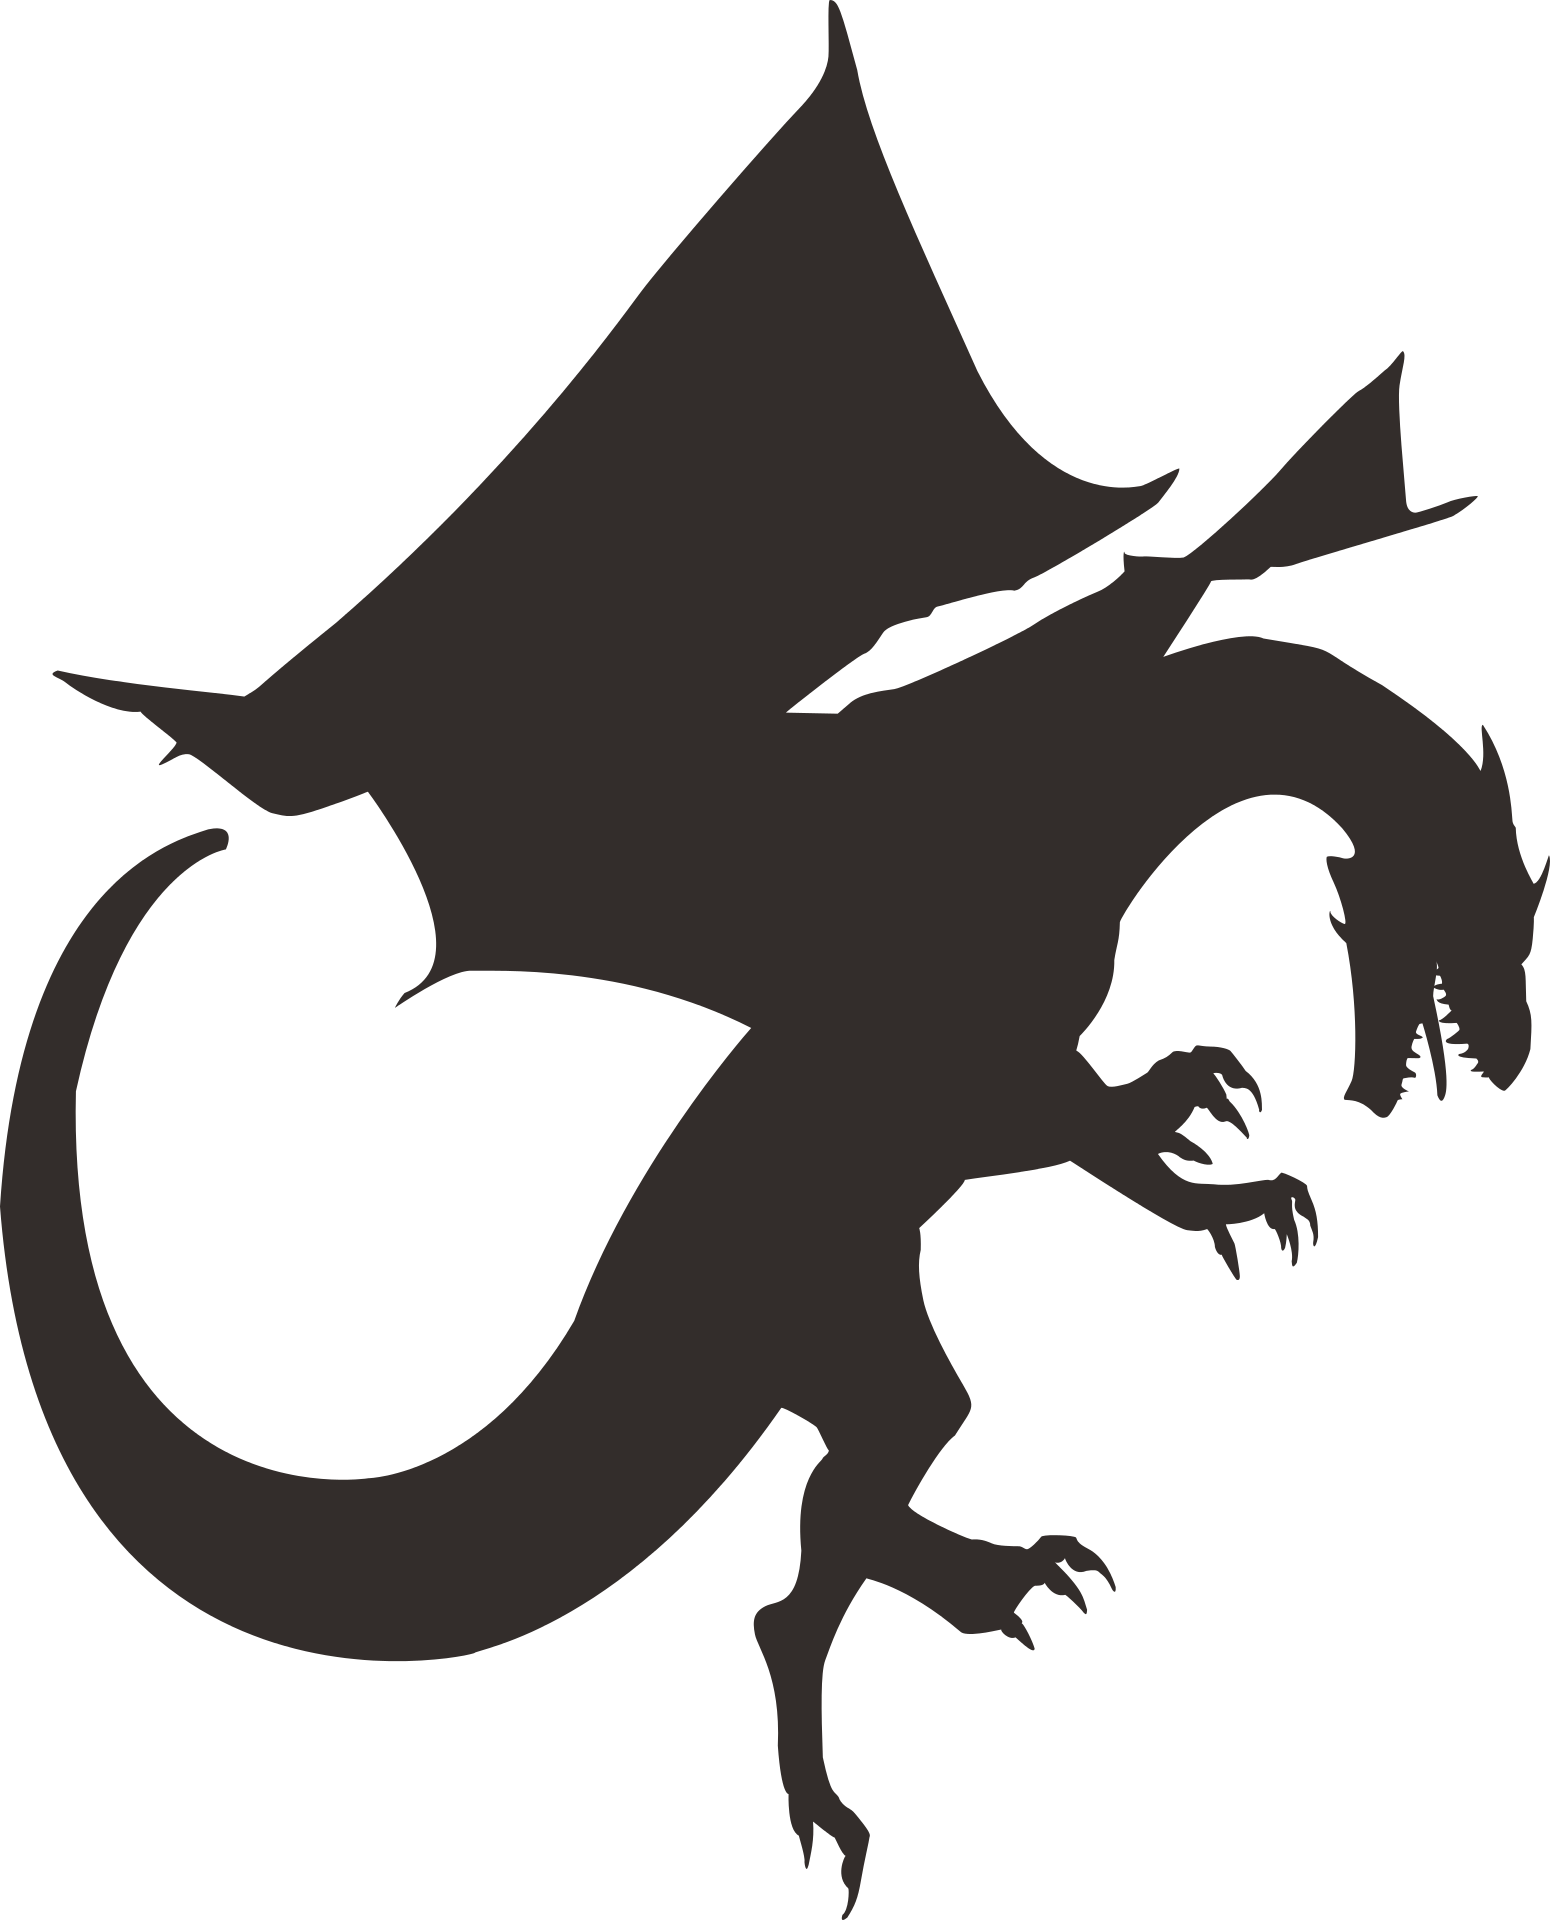 Dragon's Silhouette free image download